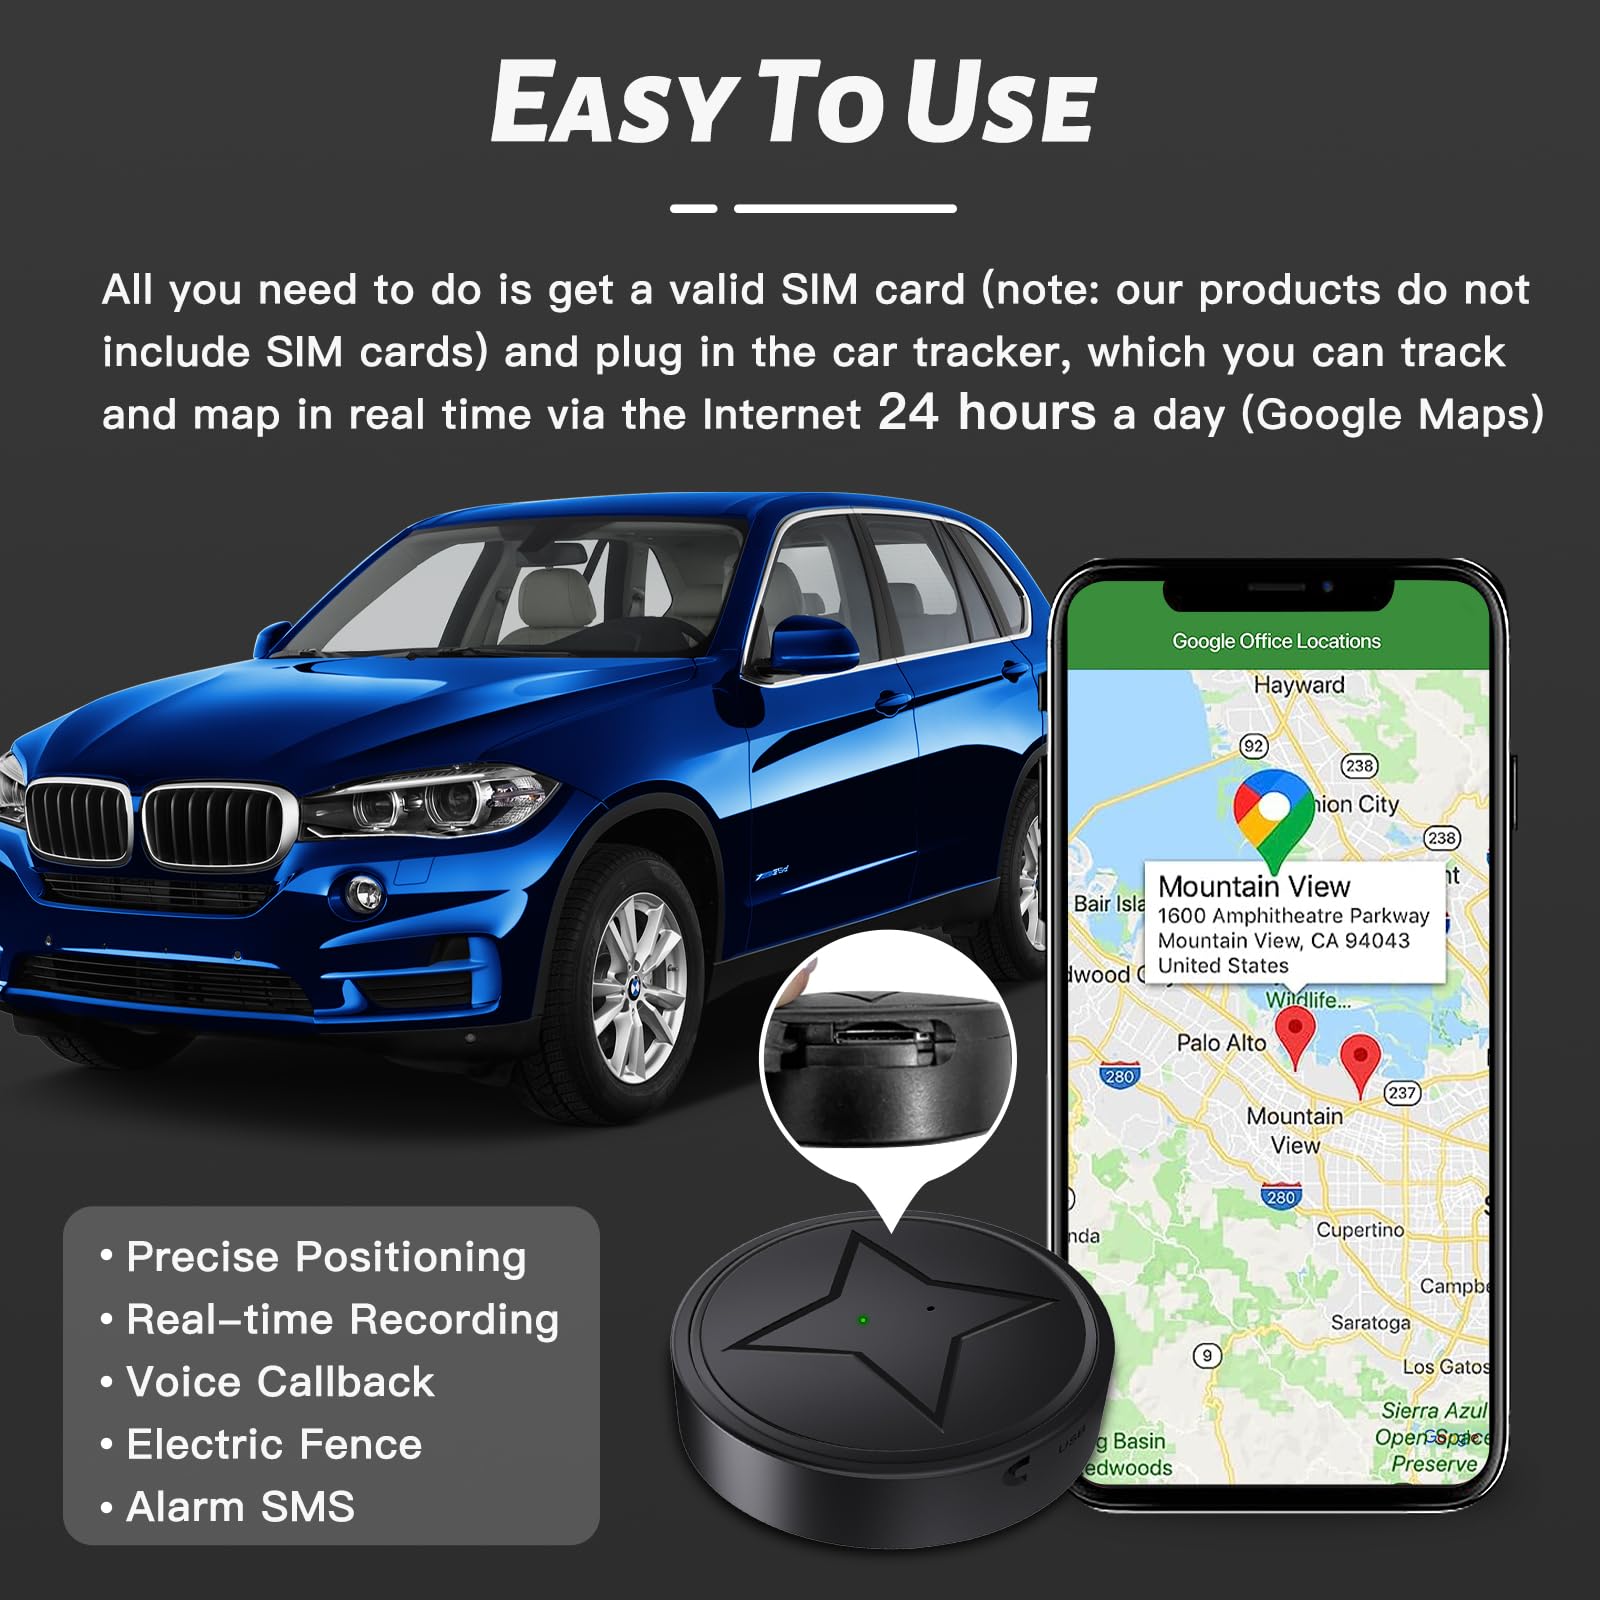 2024 Updatest GPS Tracker for Vehicles No Subscription,Mini GPS Tracker Locator Real Time,Magnetic Anti-Theft Micro Vehicle Tracking Device with Free App for Cars,Kids,Elderly,Pets,Wallet,Luggage